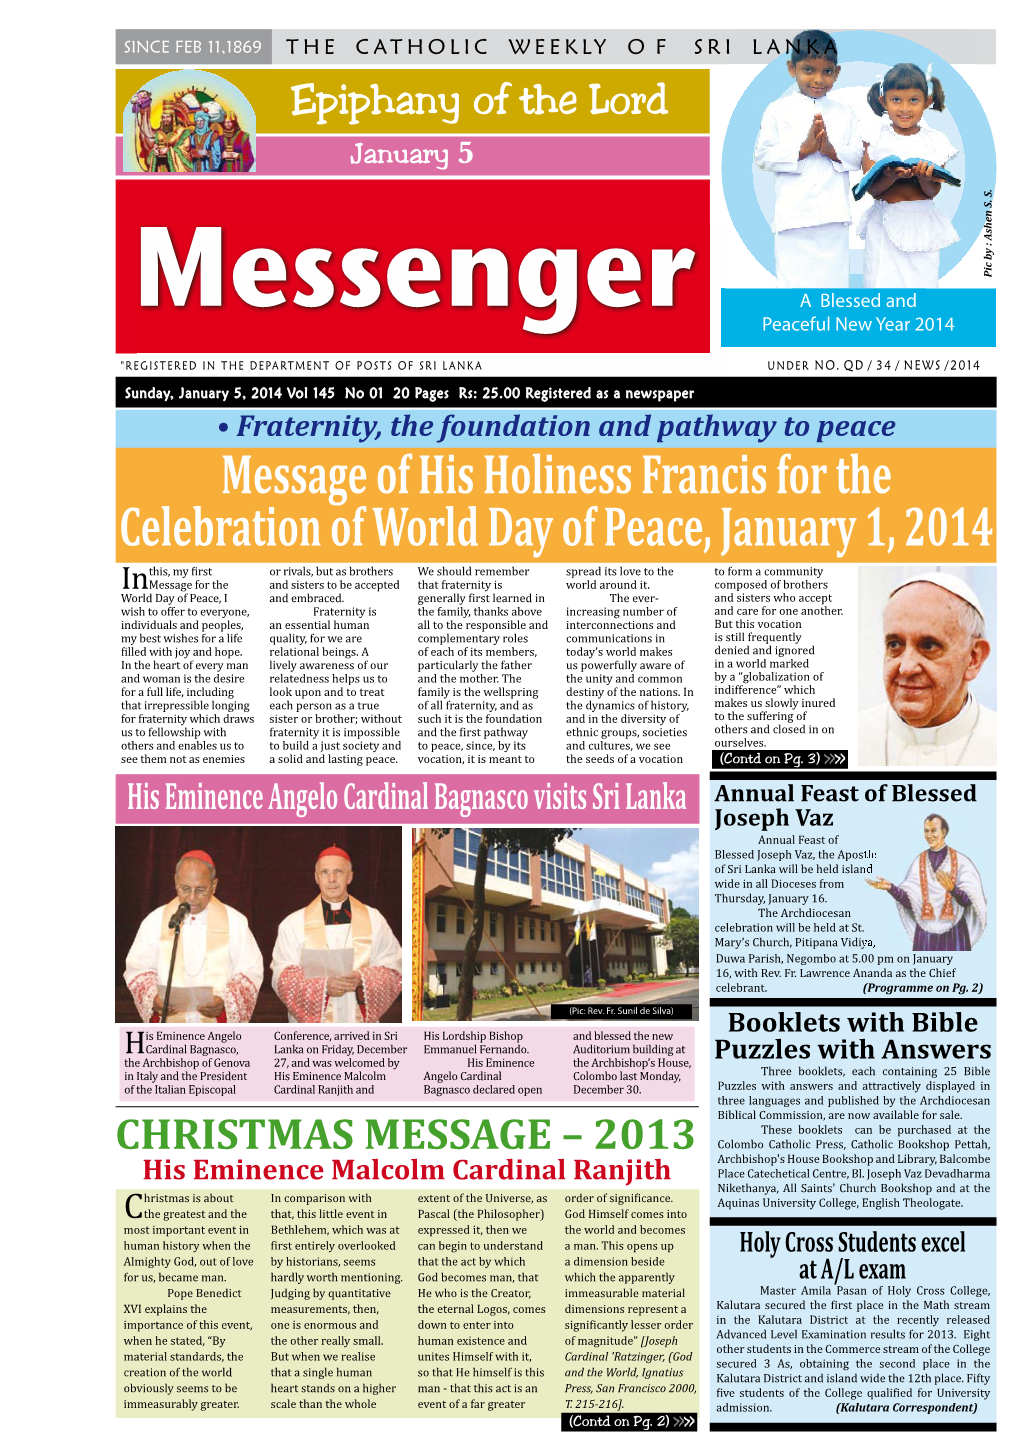 Message of His Holiness Francis for the Celebration of World Day Of